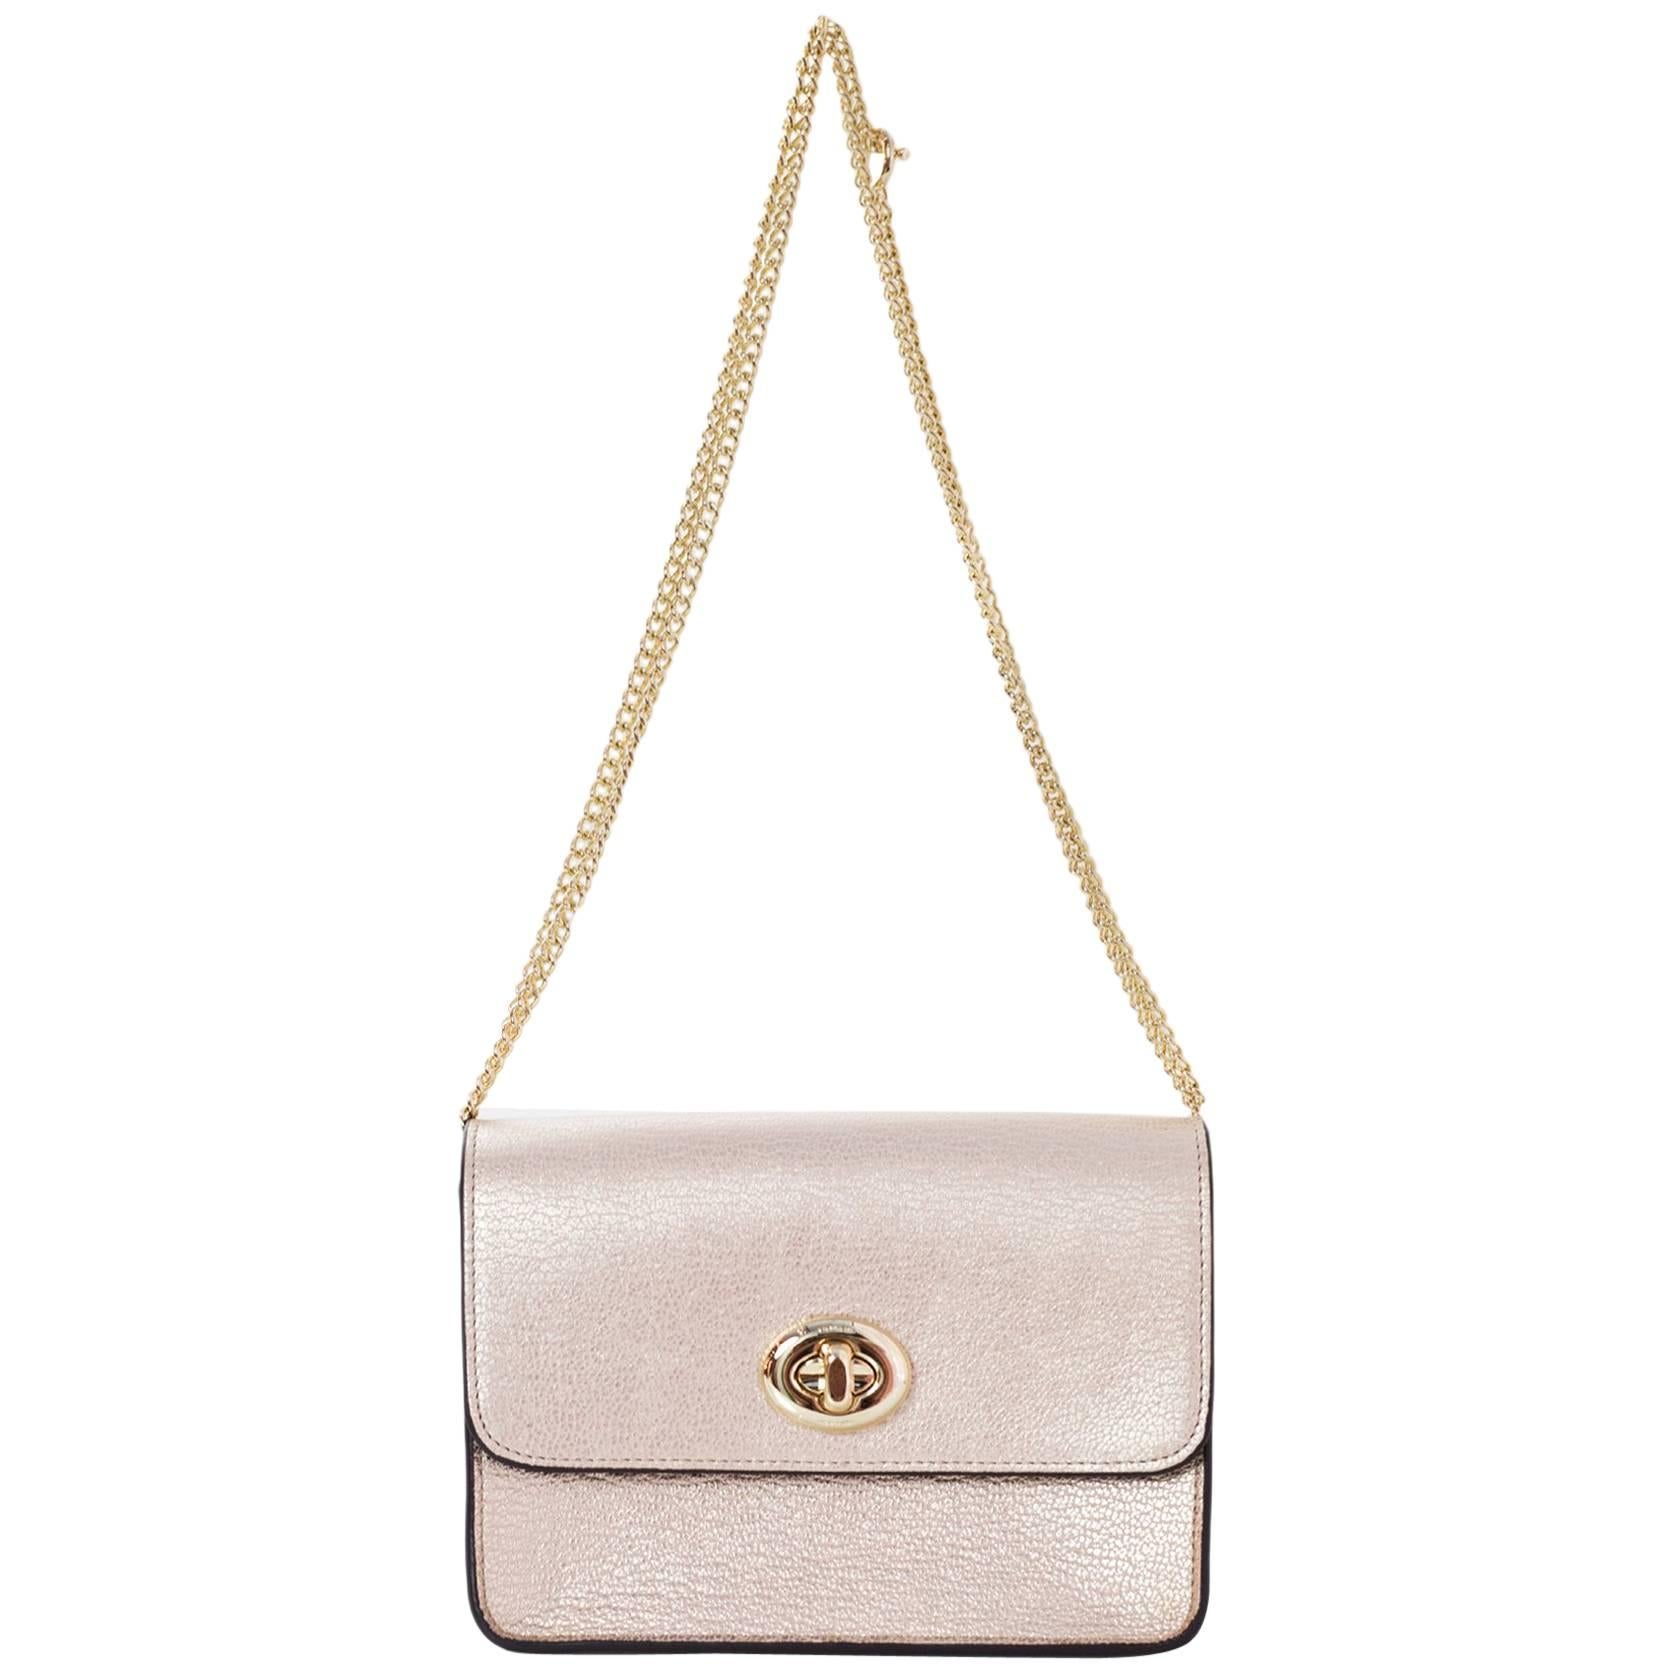 Coach Light Pink Metallic Mini Twist Lock Crossbody NWT

Color: Light pink
Hardware: Goldtone
Materials: Leather, metal
Lining: Brown suede
Closure/Opening: Flap top with twist lock
Exterior Pockets: One at back
Interior Pockets: One zip